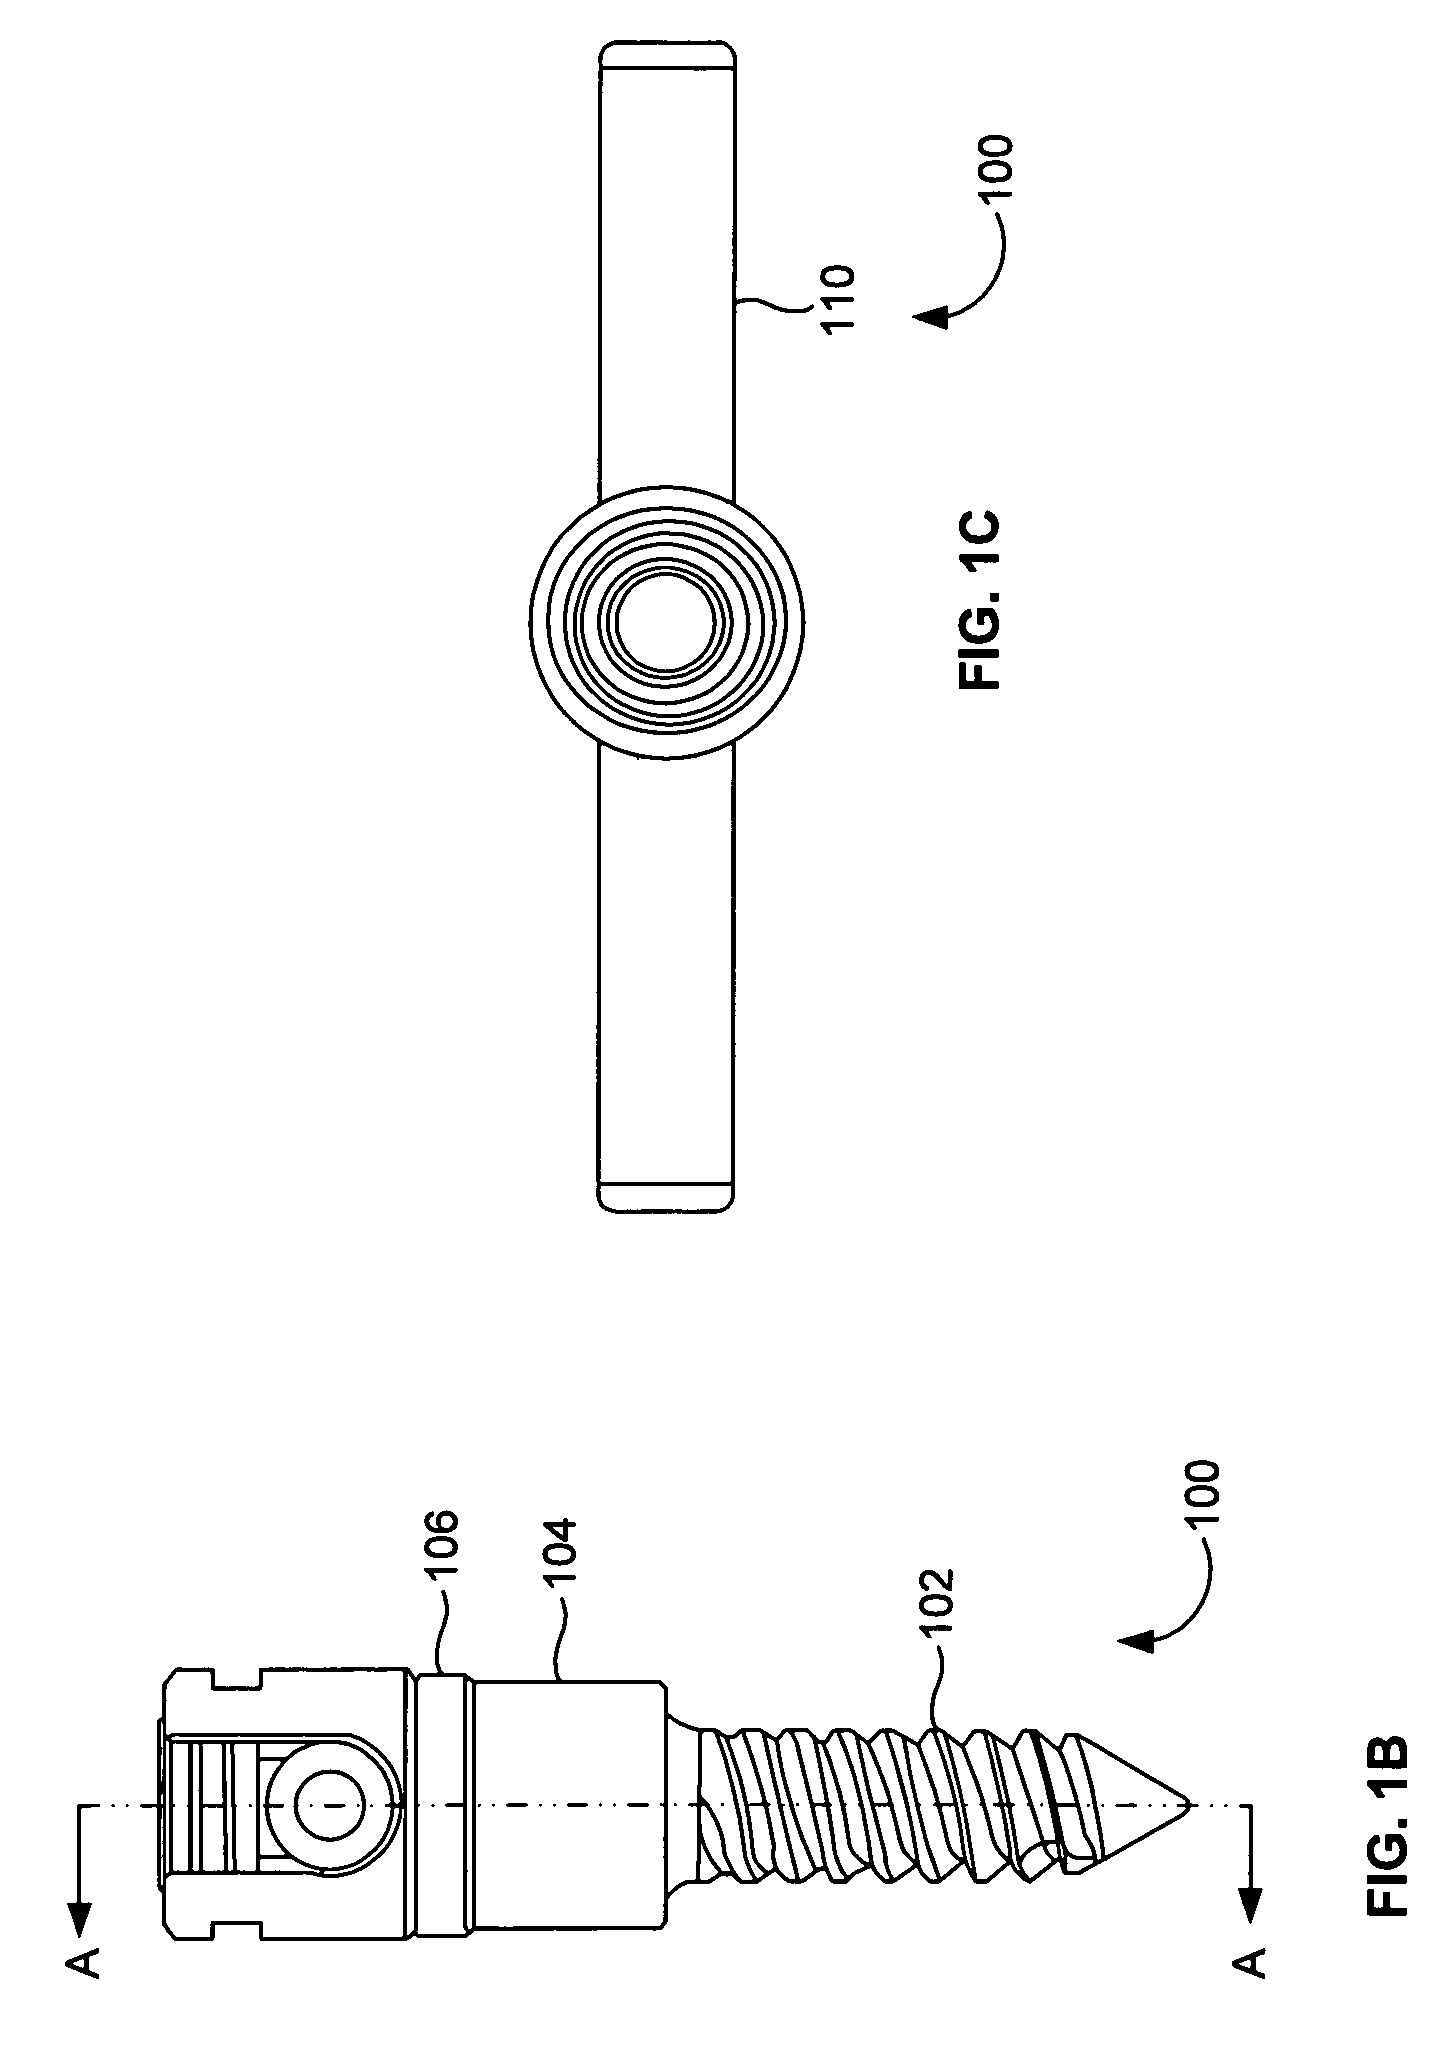 Sealed lubrication system and method for dynamic stabilization system